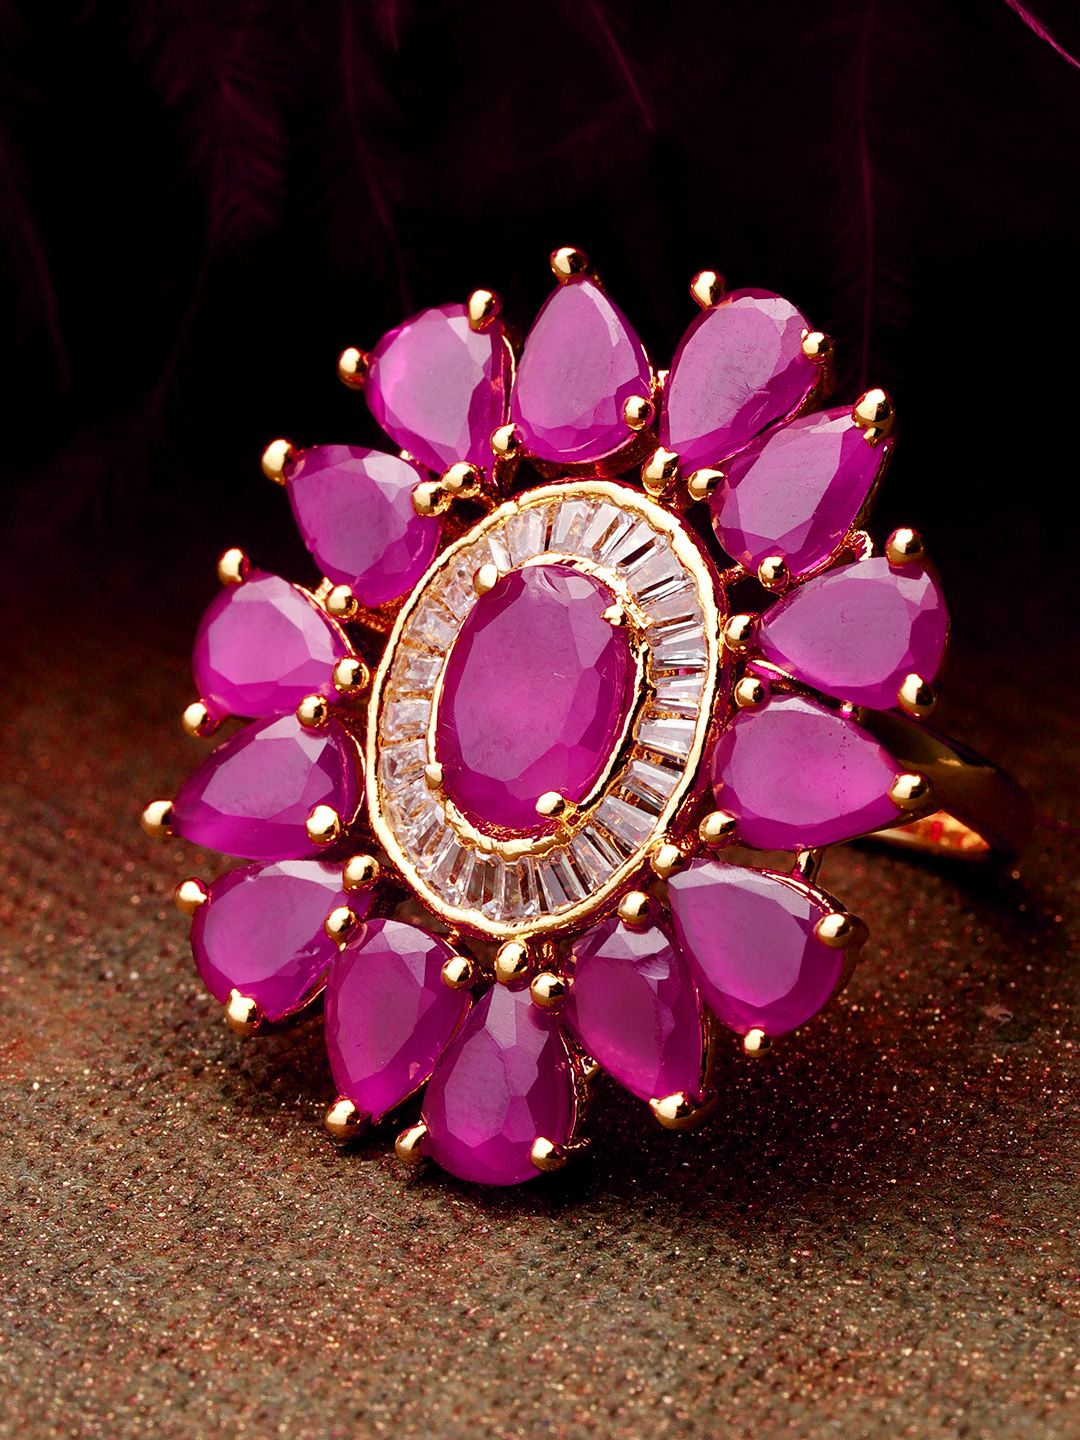 Priyaasi Gold-Plated & Magenta Handcrafted American Diamond Studded Adjustable Finger Ring Price in India